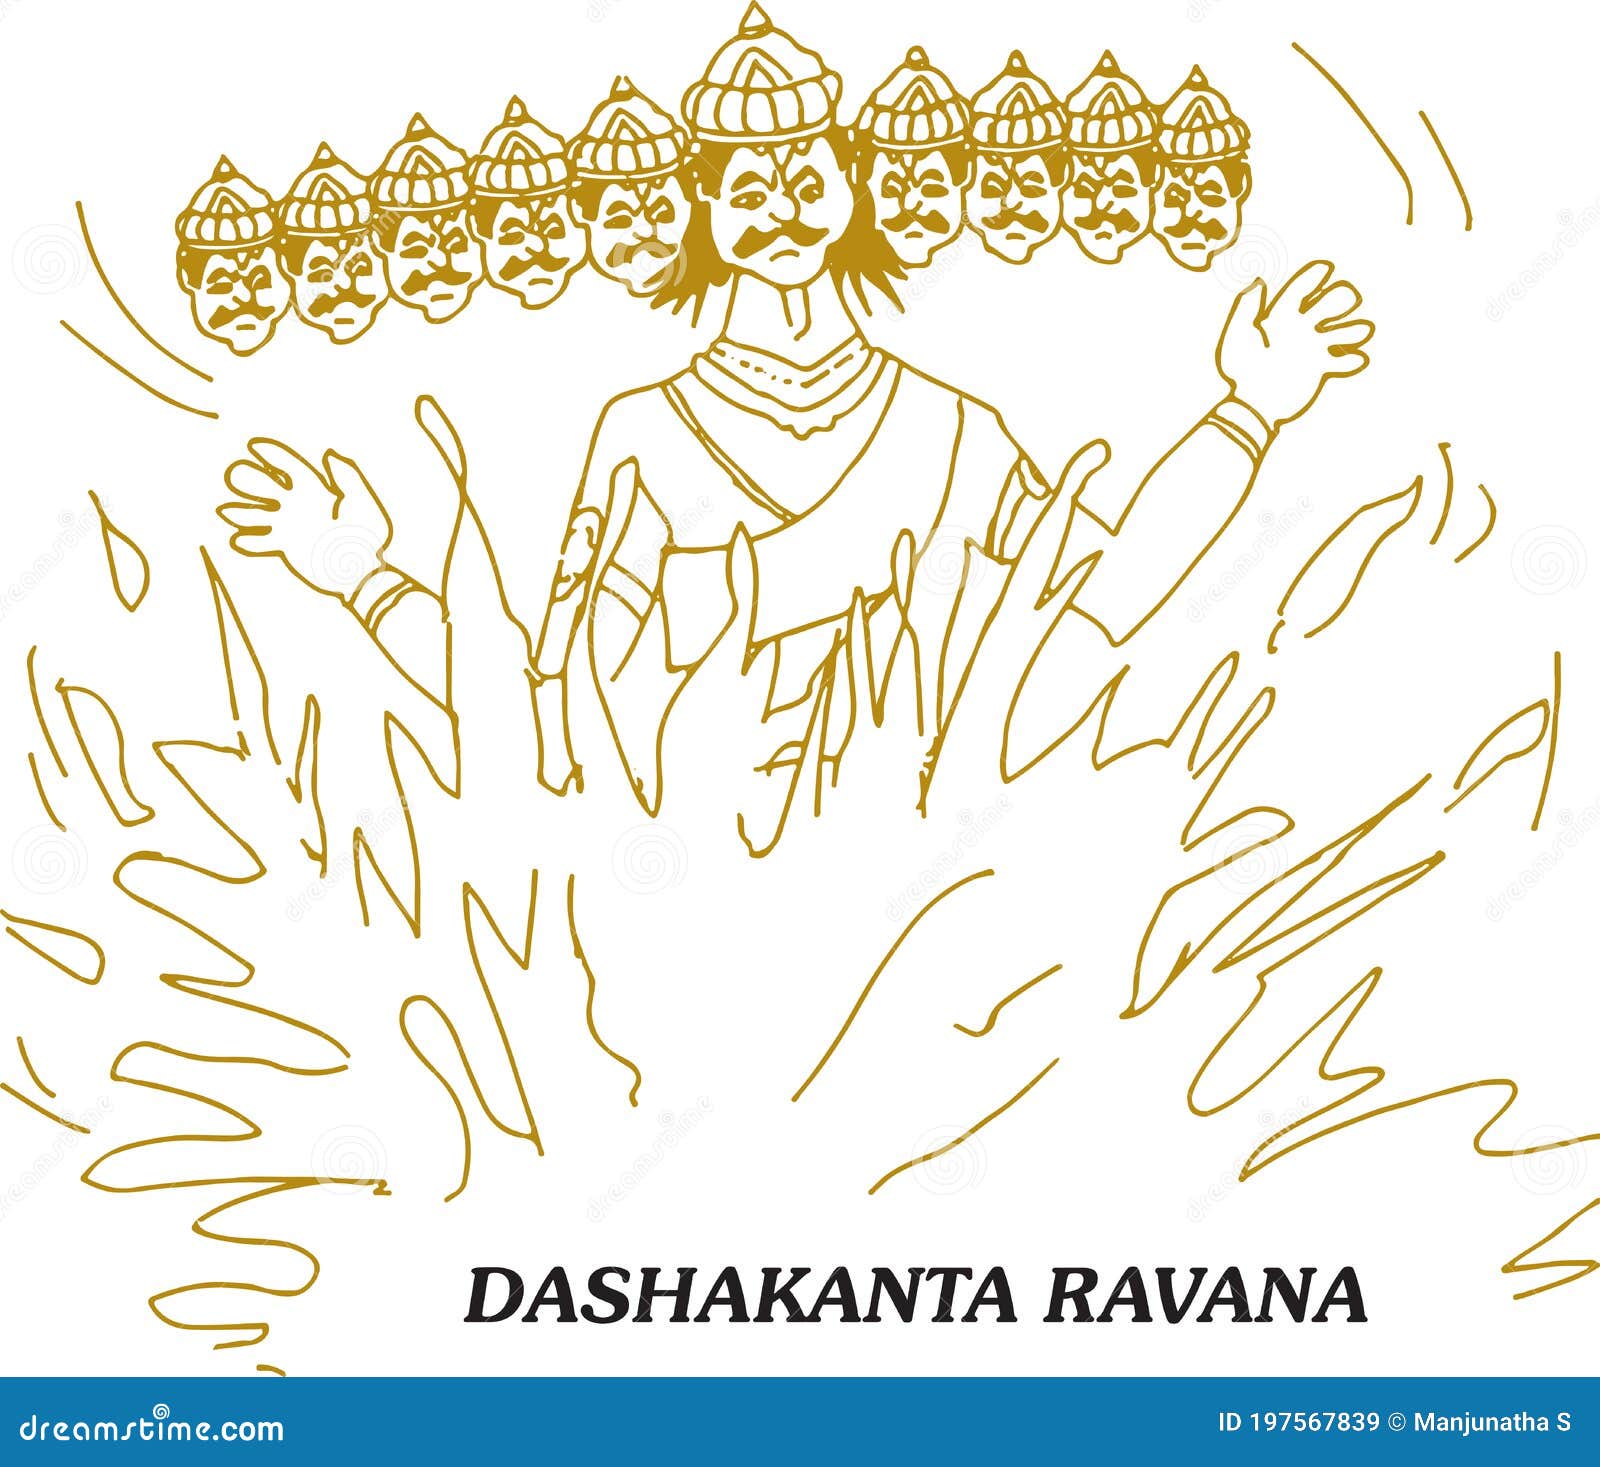 How to draw Ravana for Dussehra | Dussehra Drawing for Kids - #1 Fashion  Blog 2023 - Lifestyle, Health, Makeup & Beauty